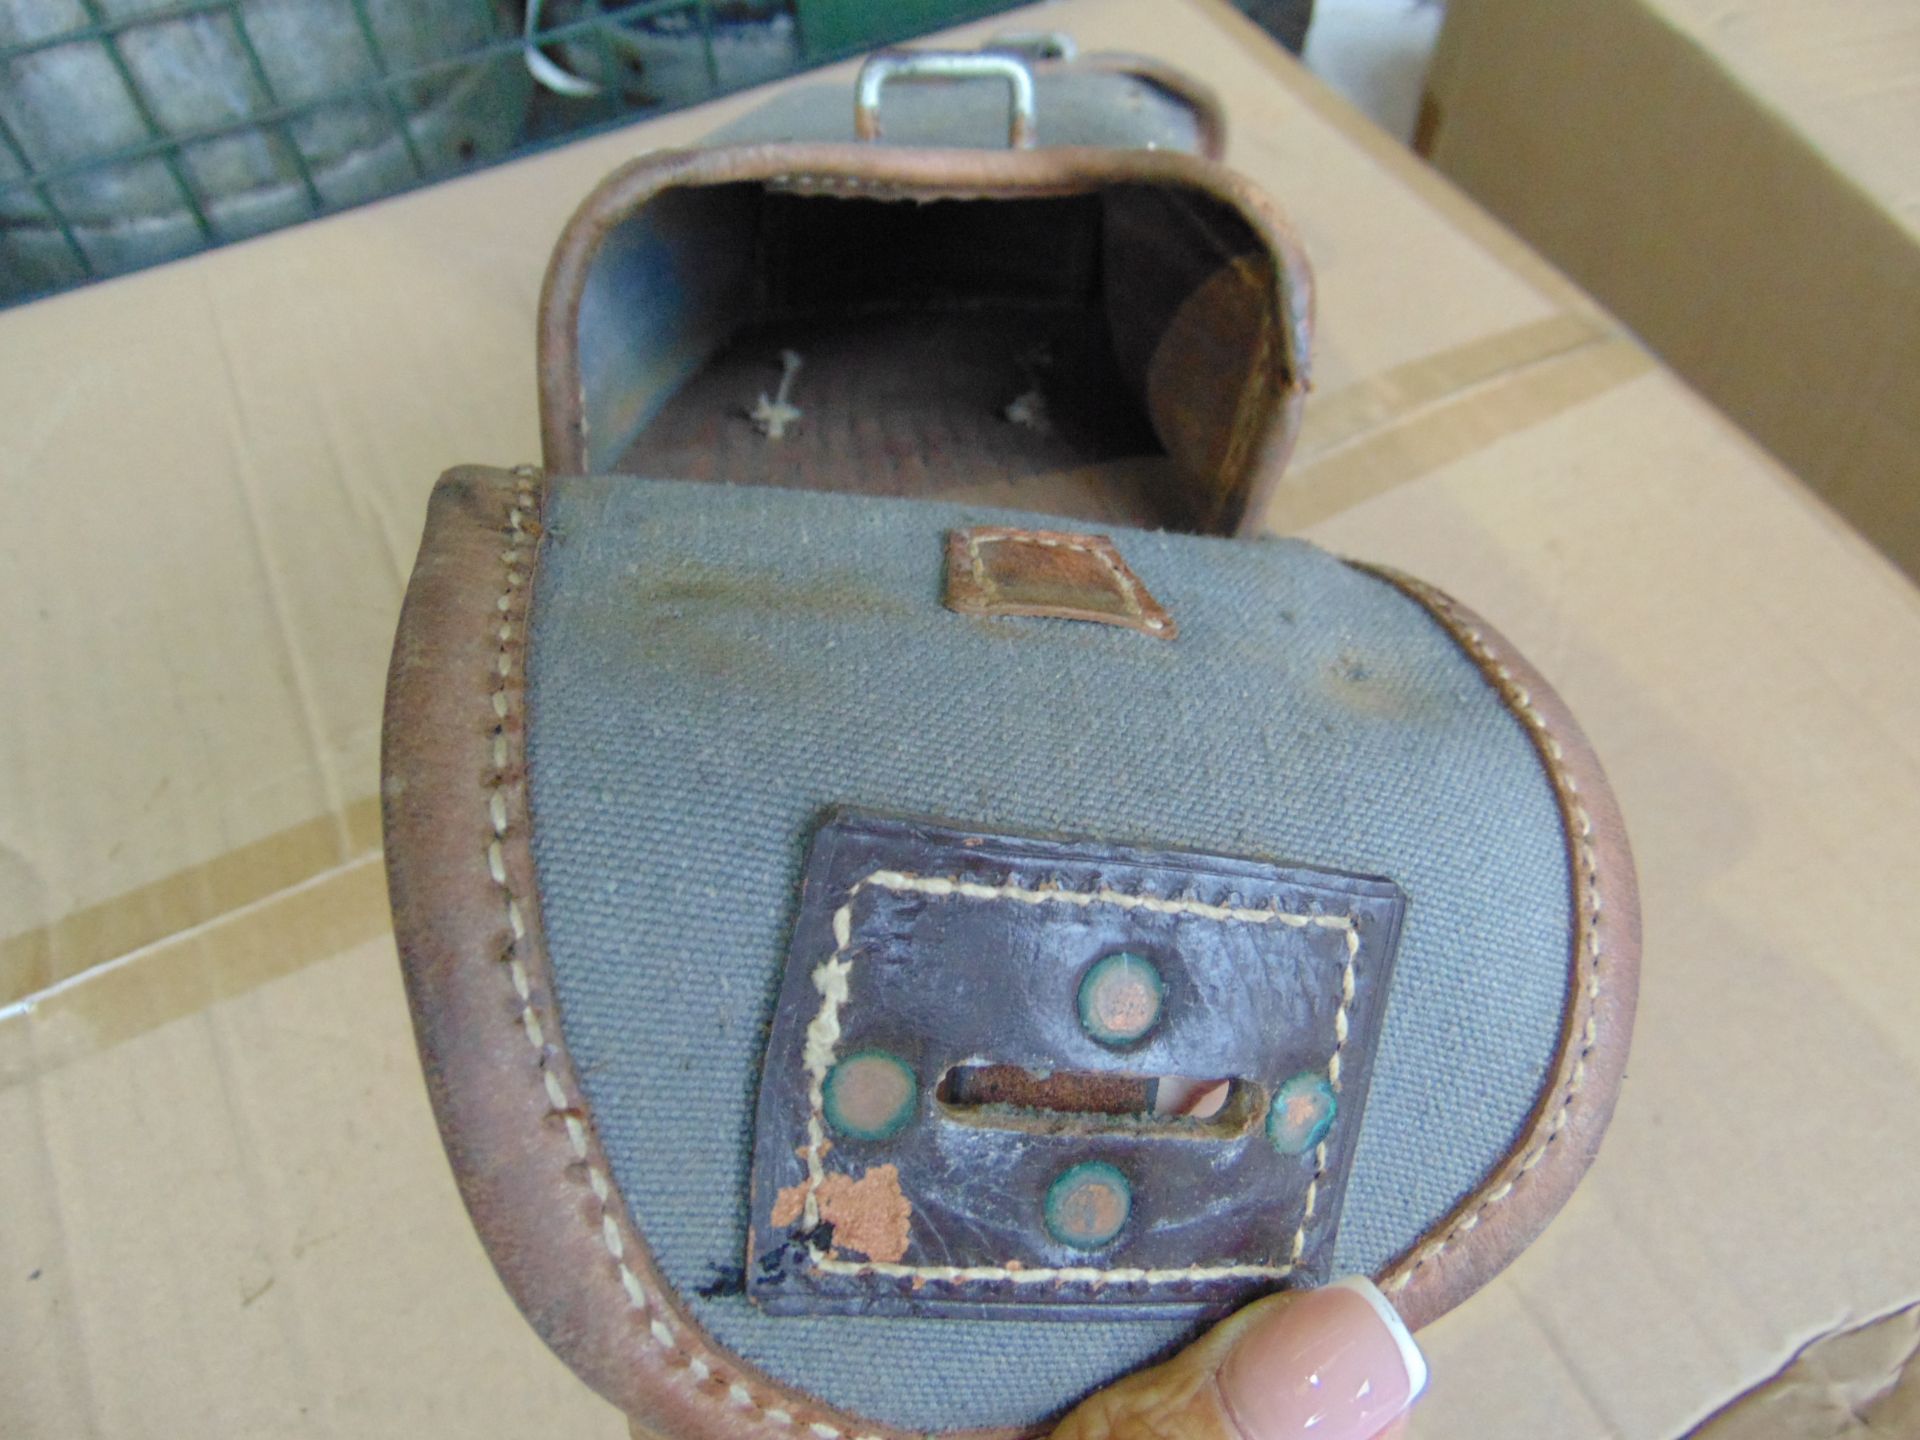 ORIGINAL GERMAN WW2 MG 13 MAGAZINE POUCH IN EXCELLENT CONDITION - Image 5 of 6